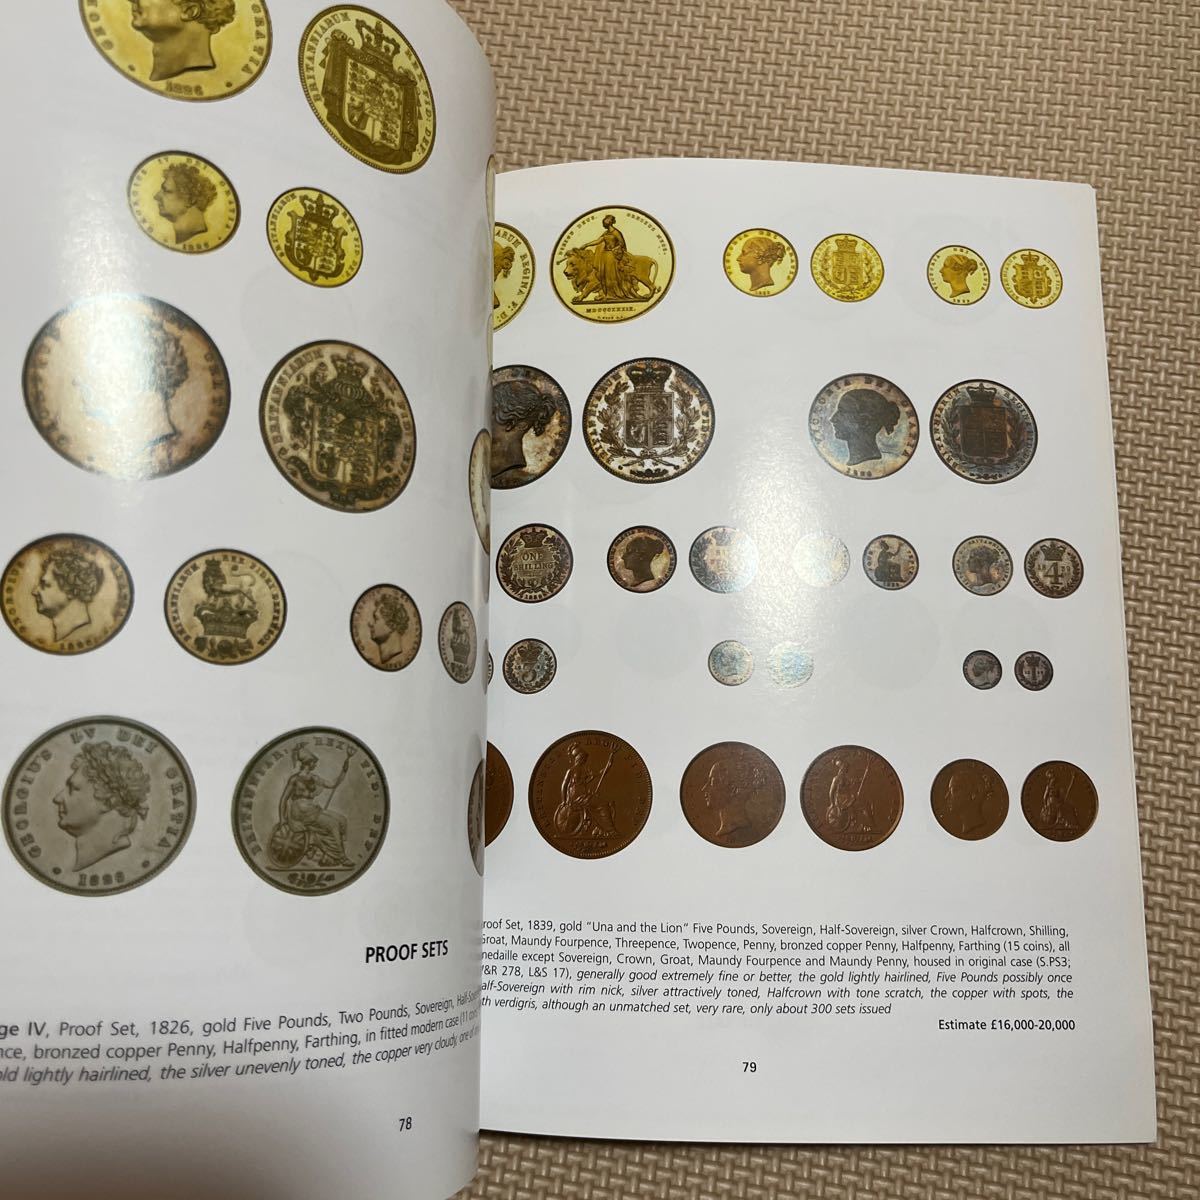 SPINK THE SAMUEL KING COLLECTION OF HIGHLY IMPORTANT ENGLISH GOLD COINS 2005 カタログ コイン メダル 硬貨 金貨 コレクションの画像5